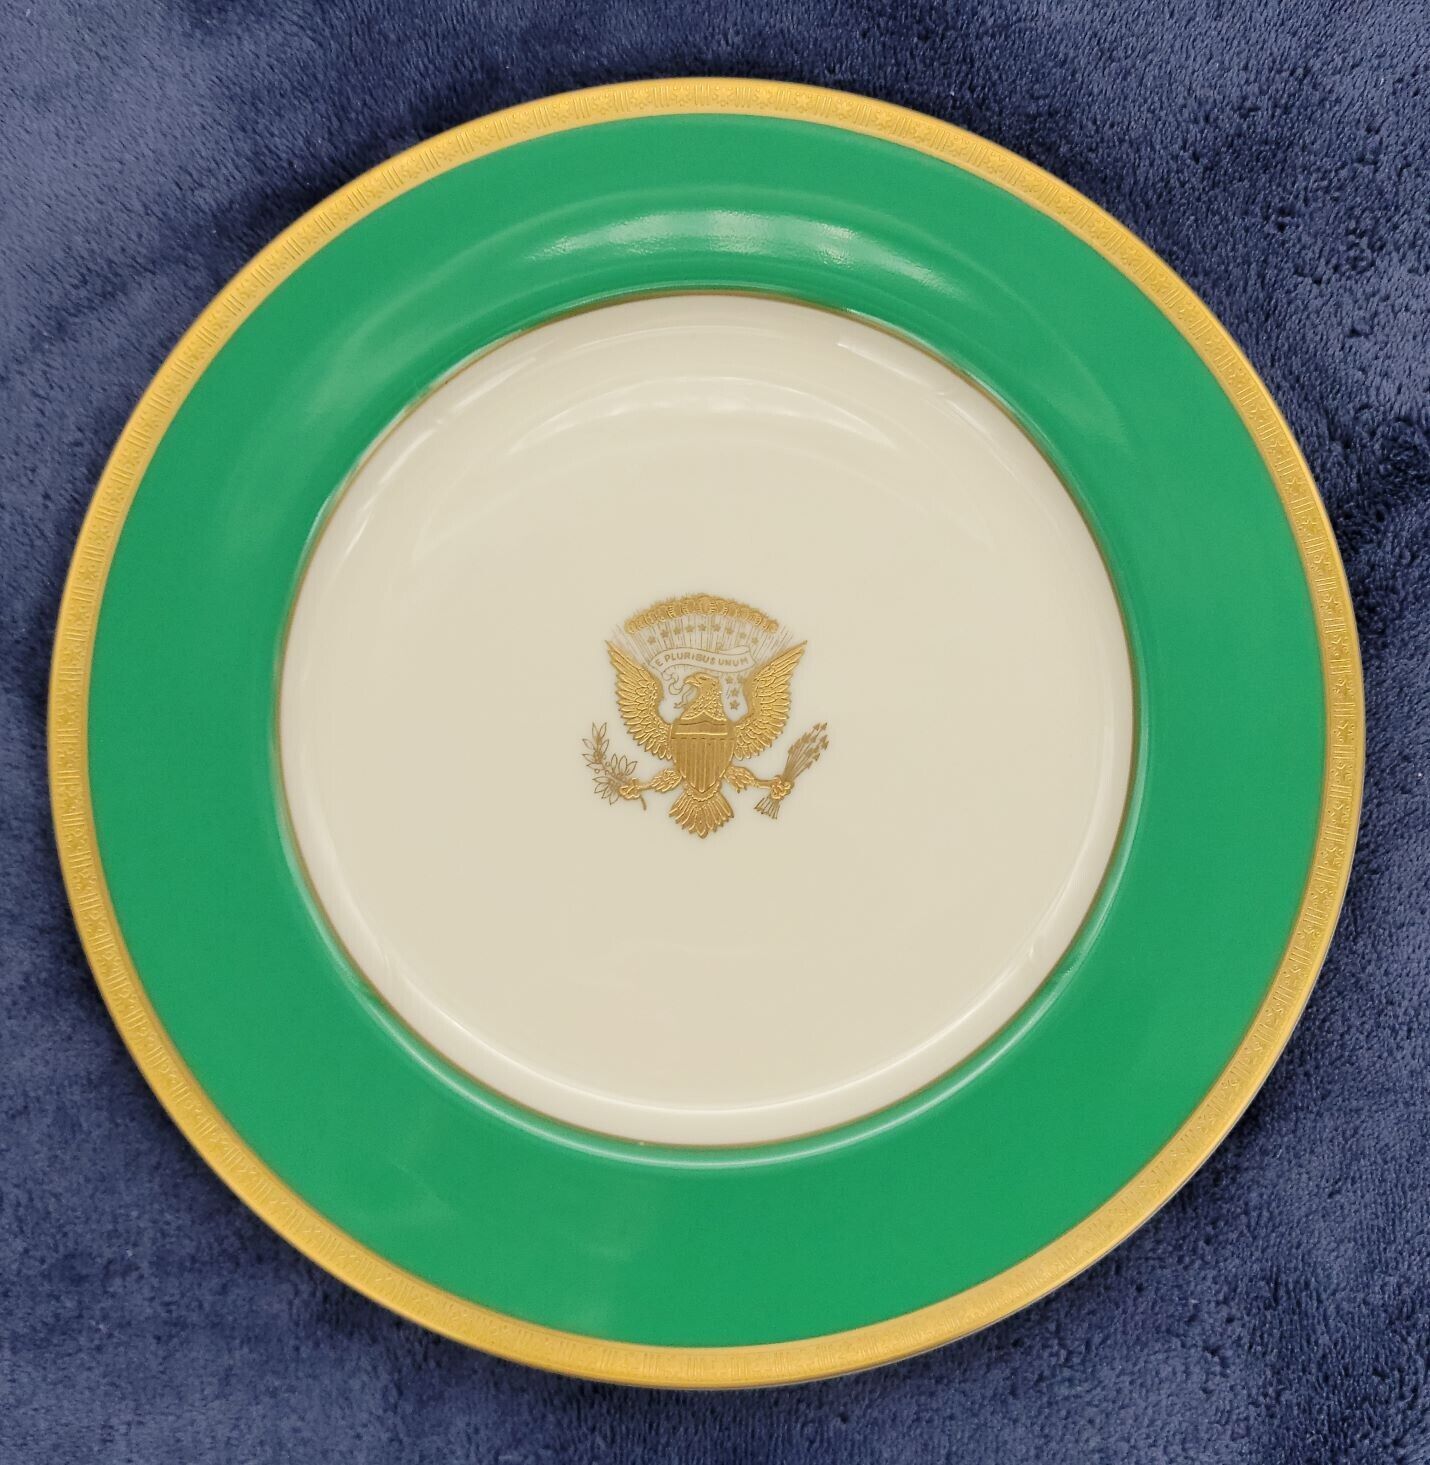 (EXTREMELY SCARCE) PRESIDENT JIMMY - OFFICIAL INAUGURAL CHARGER PLATE